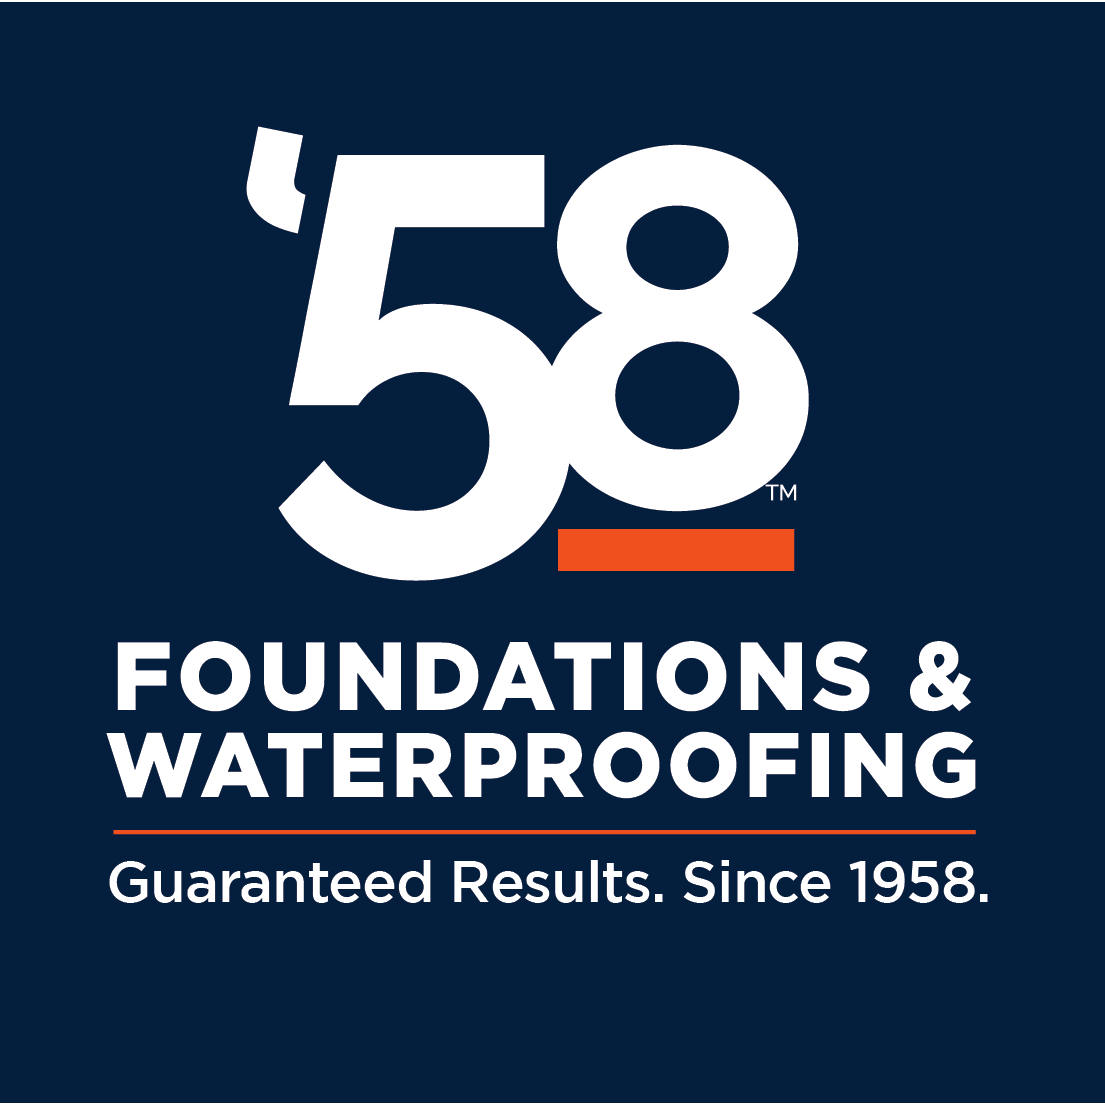 58 Foundations & Waterproofing - Johnson City, TN - (423)226-5092 | ShowMeLocal.com